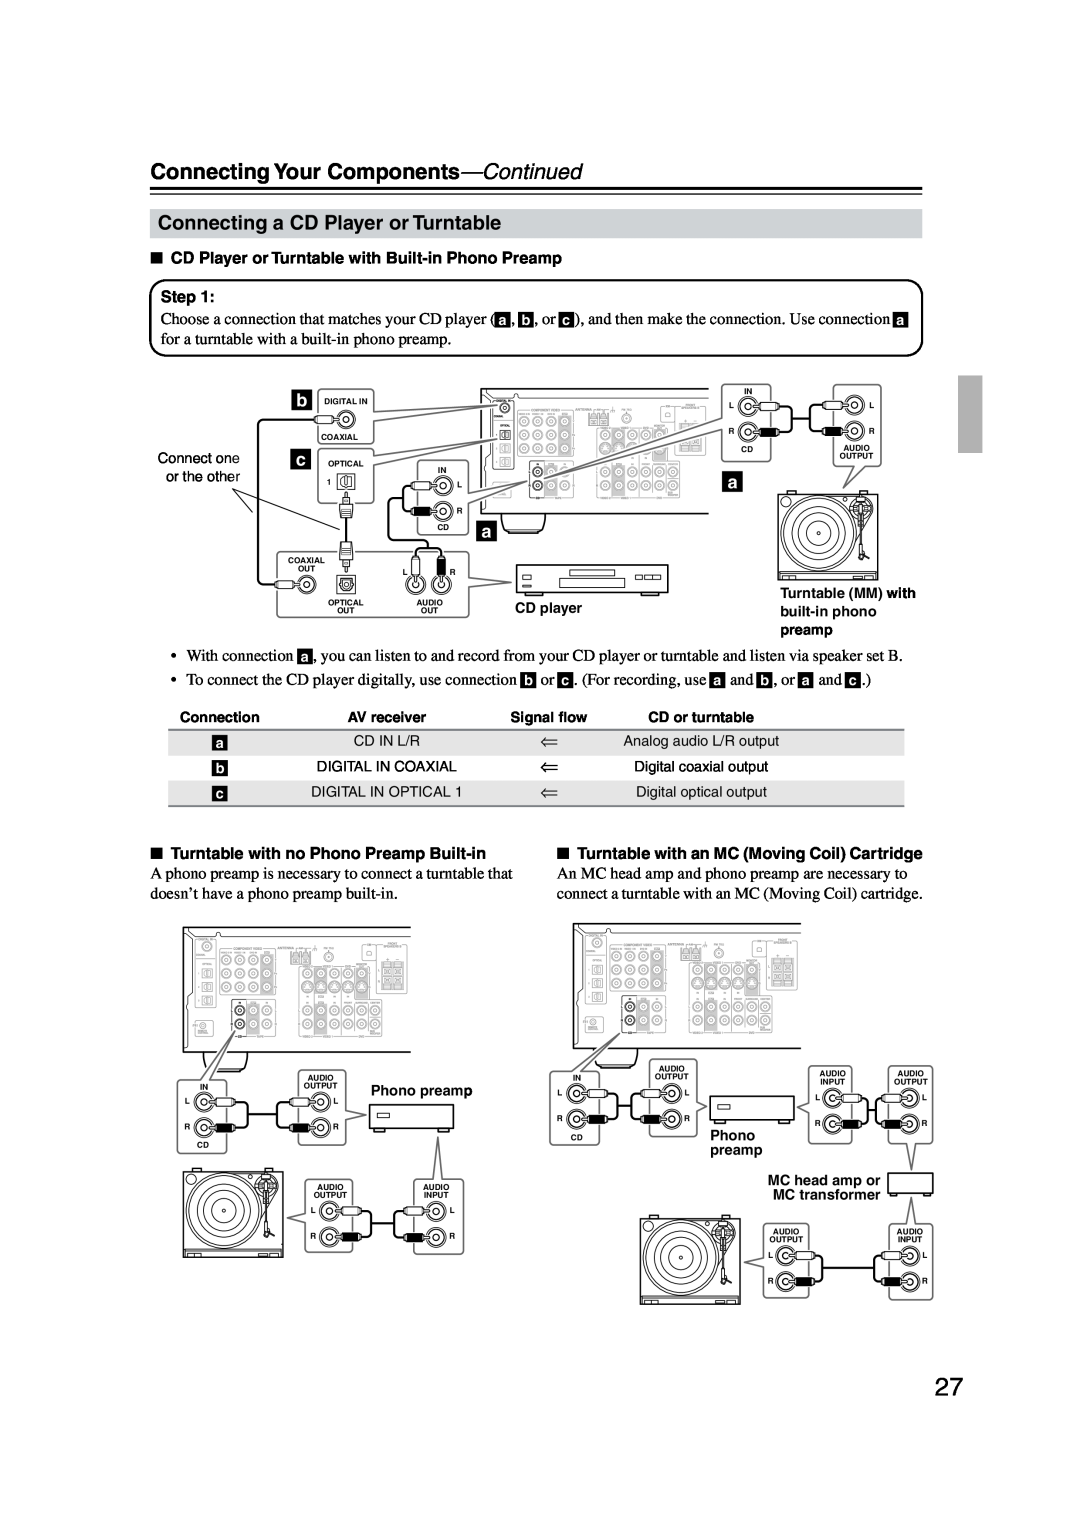 Onkyo TX-SR573 instruction manual Connecting a CD Player or Turntable, Connecting Your Components—Continued, Step 